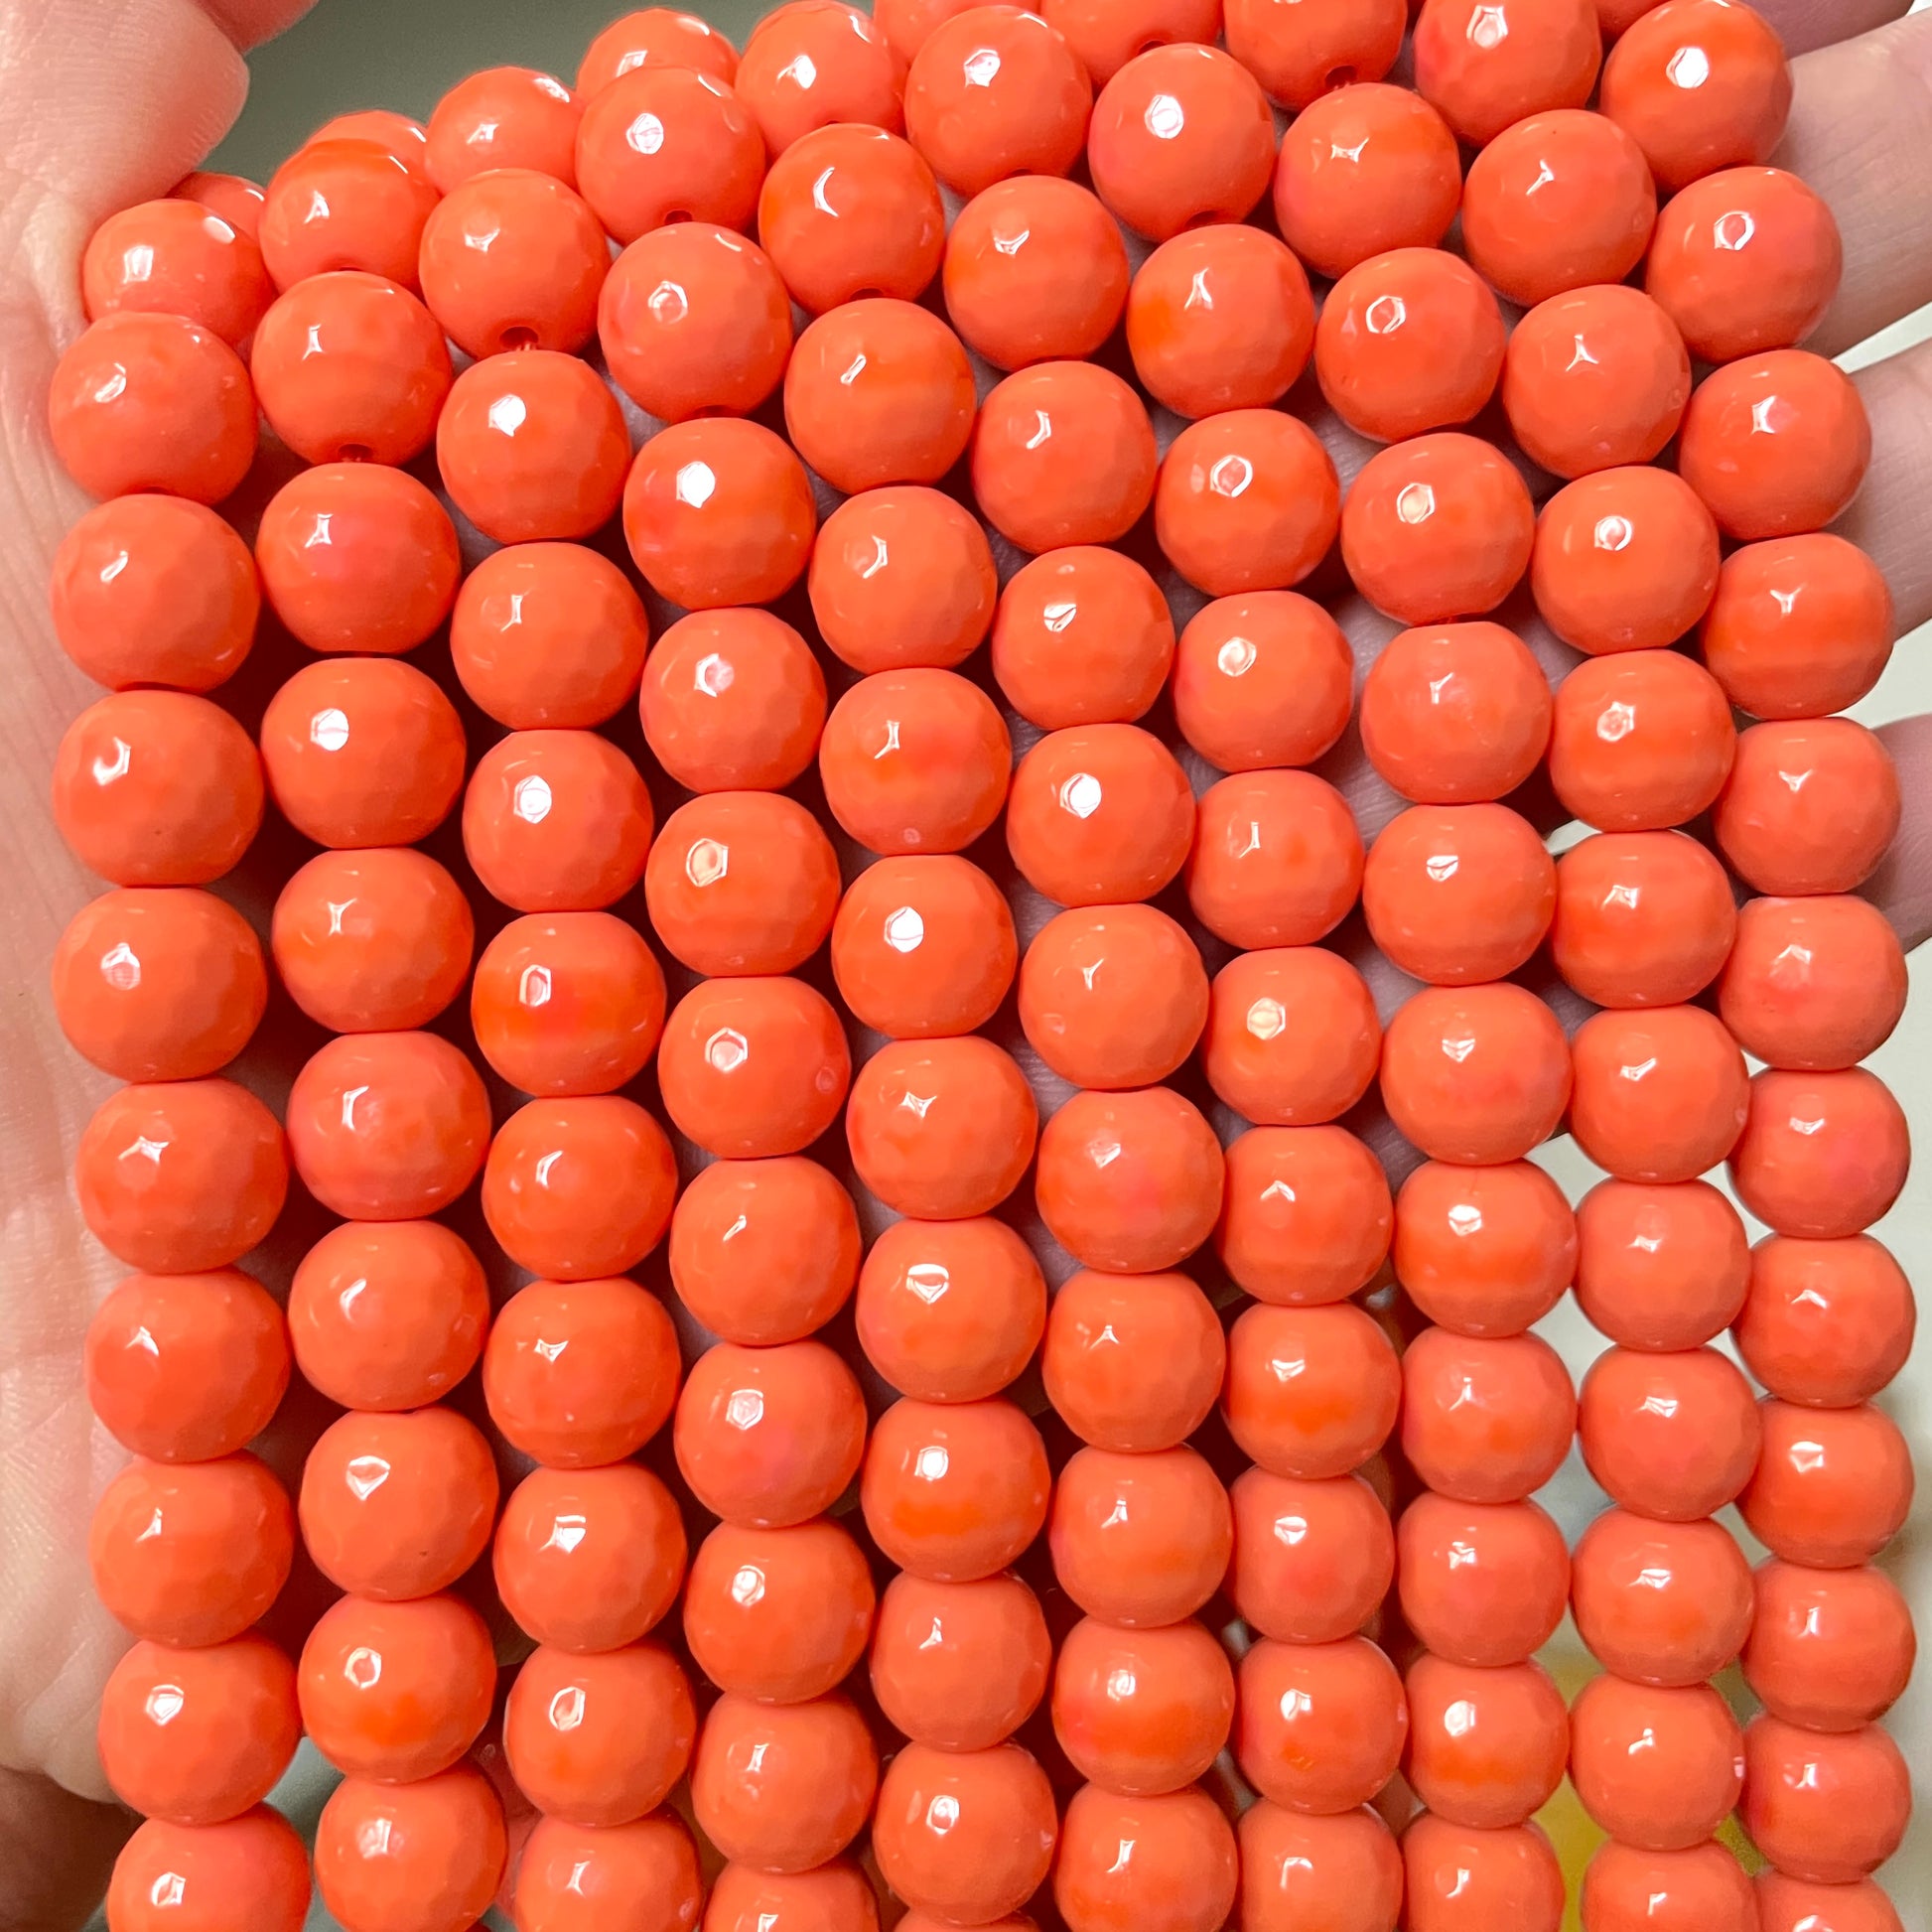 2 Strands/lot 10mm Orange Faceted Jade Stone Beads Stone Beads Faceted Jade Beads New Beads Arrivals Charms Beads Beyond